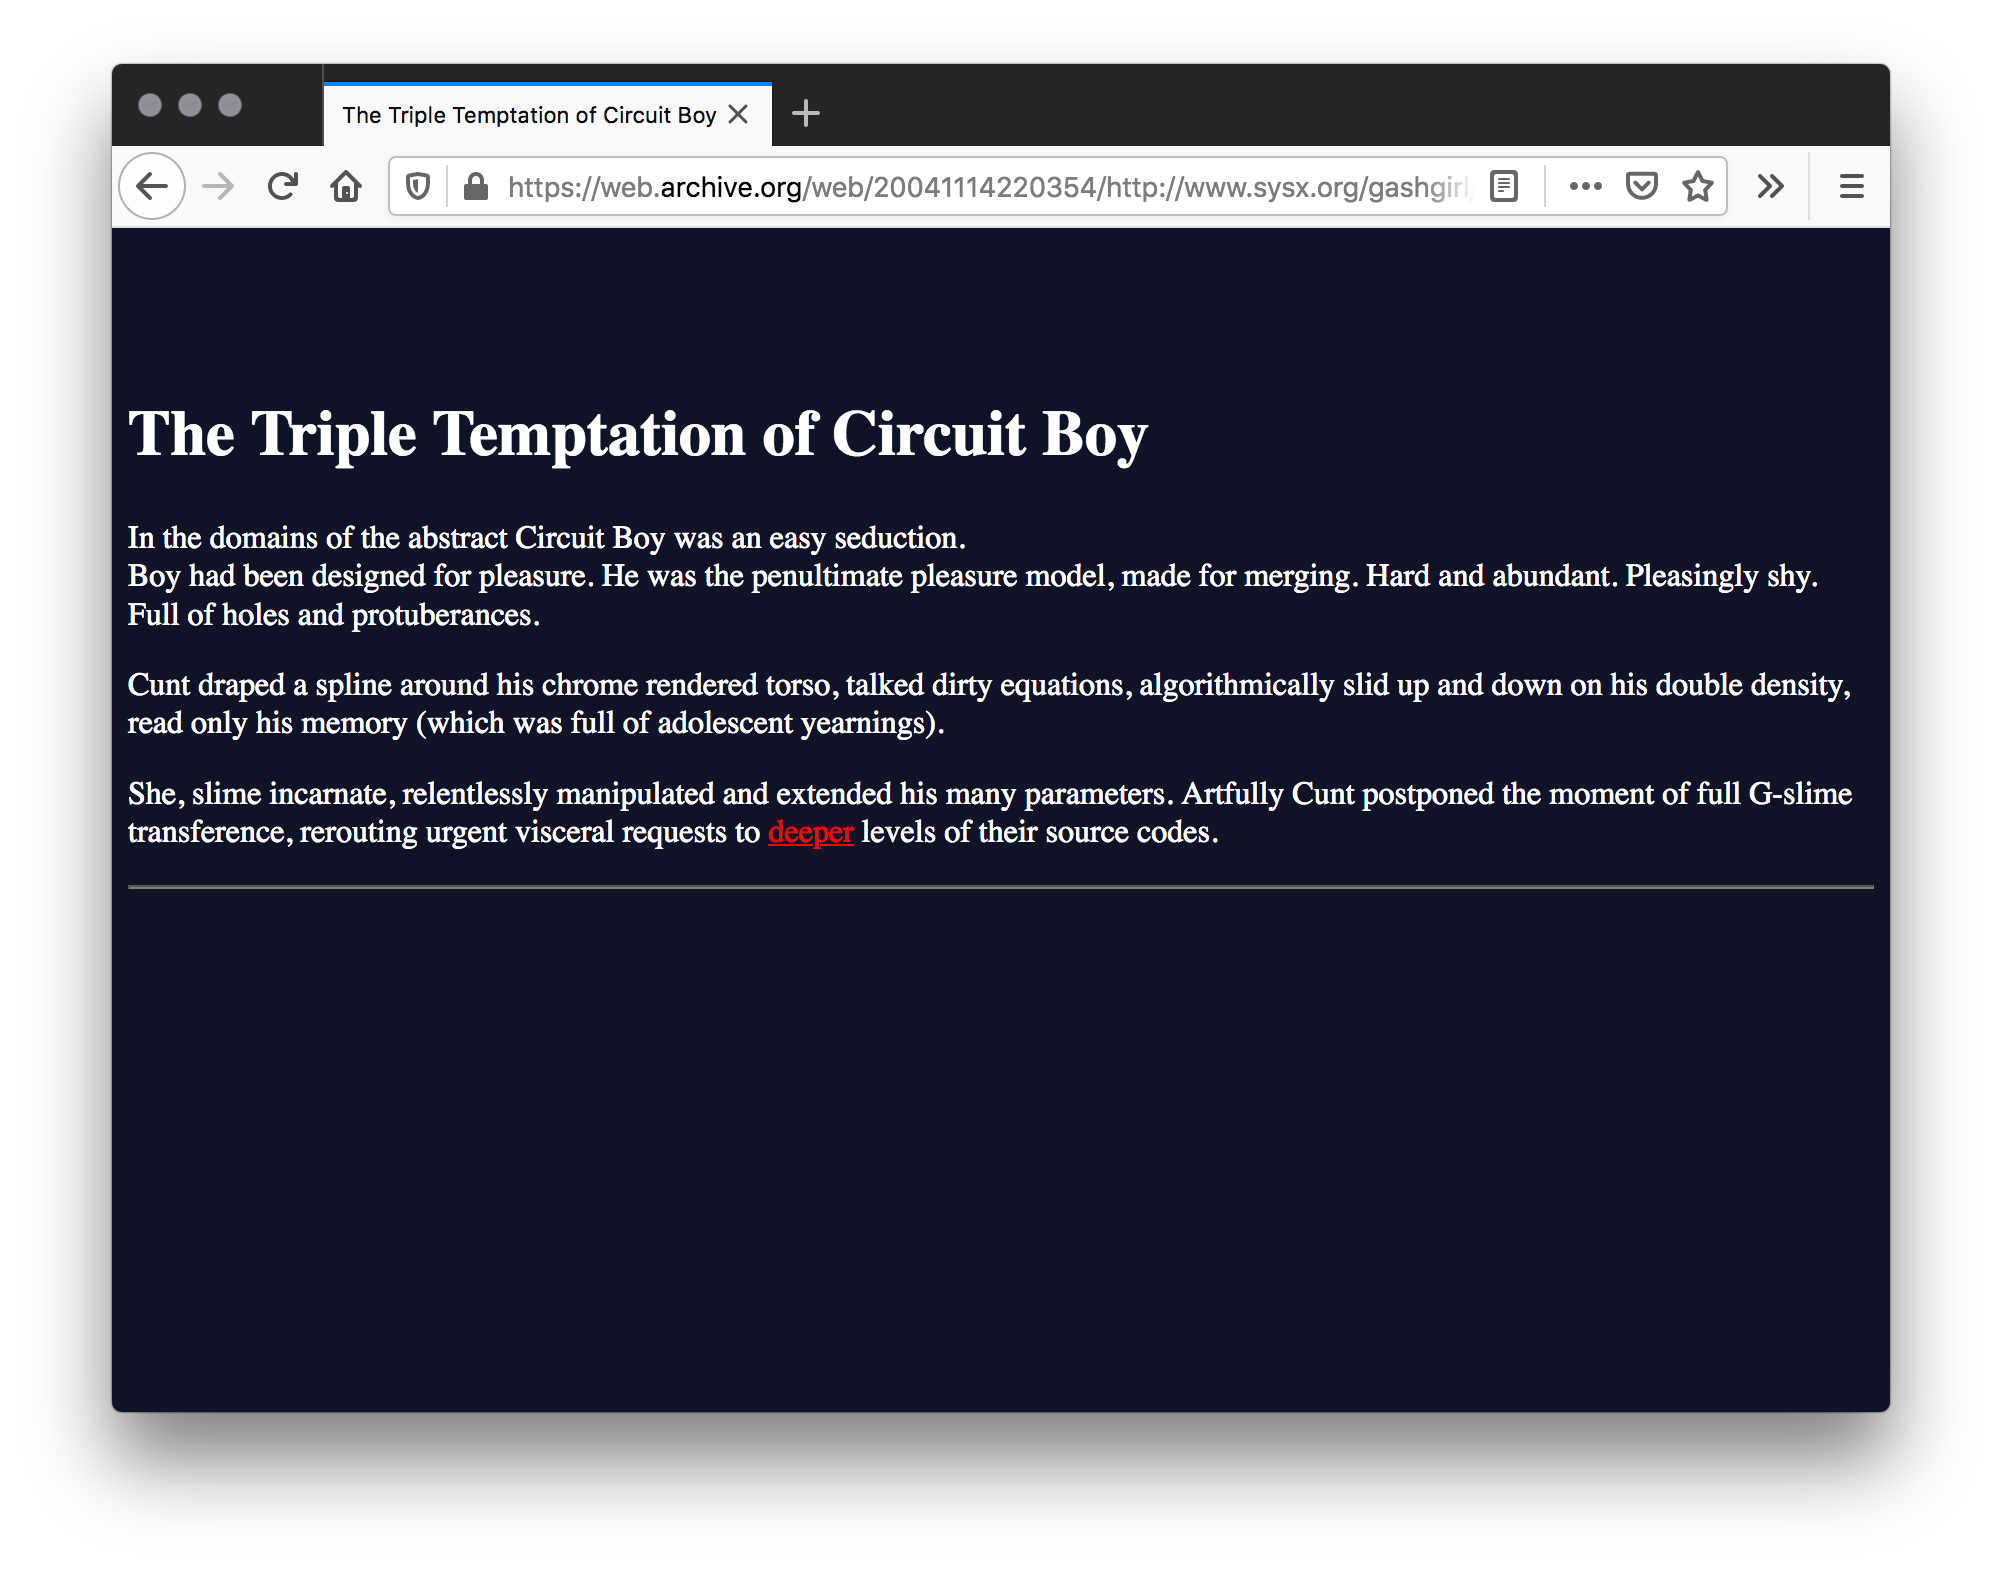 Screenshot of navy blue webpage with "The Triple Temptation of Circuit Boy" as the title typed in white. A poem typed in white text with some words underlined and in red text fills half of the page with a white line underneath the poem.